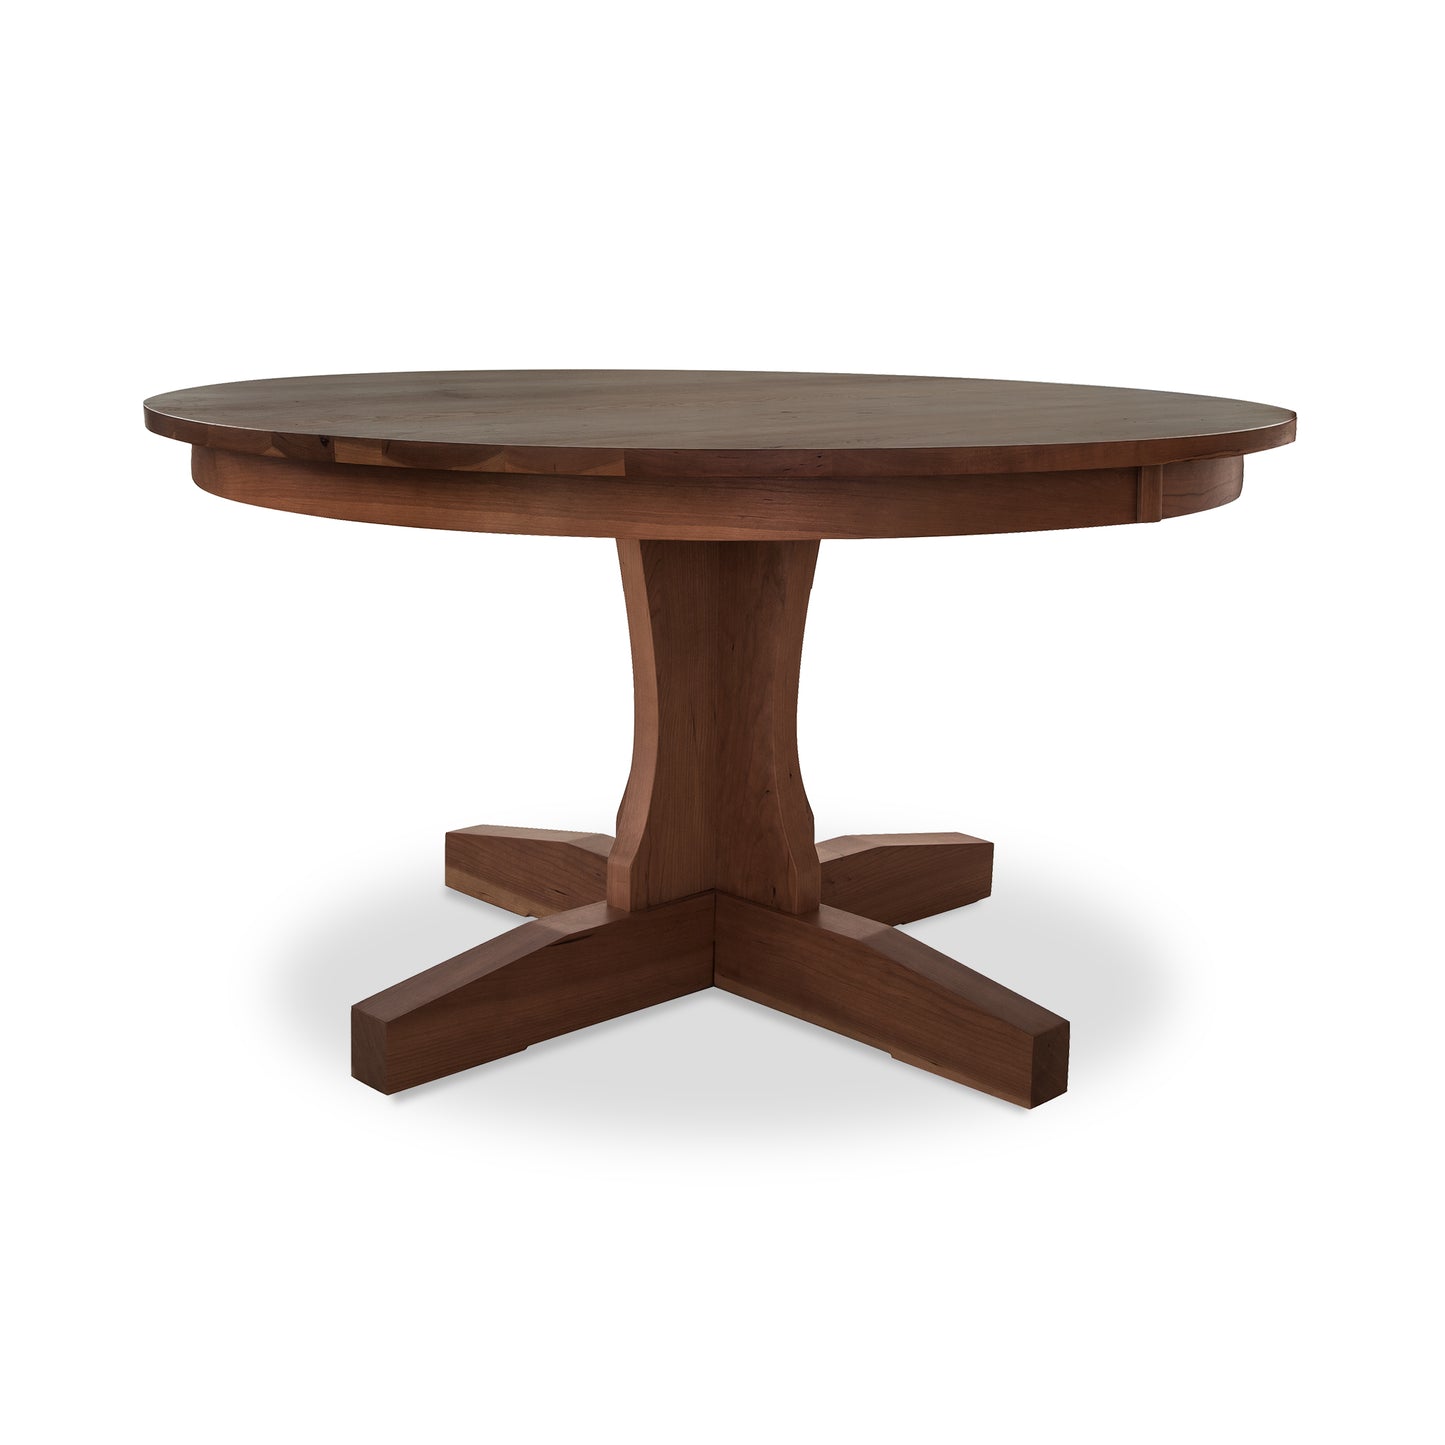 A New Traditions Round Pedestal Table by Lyndon Furniture, with four legs and a natural finish on a white background.